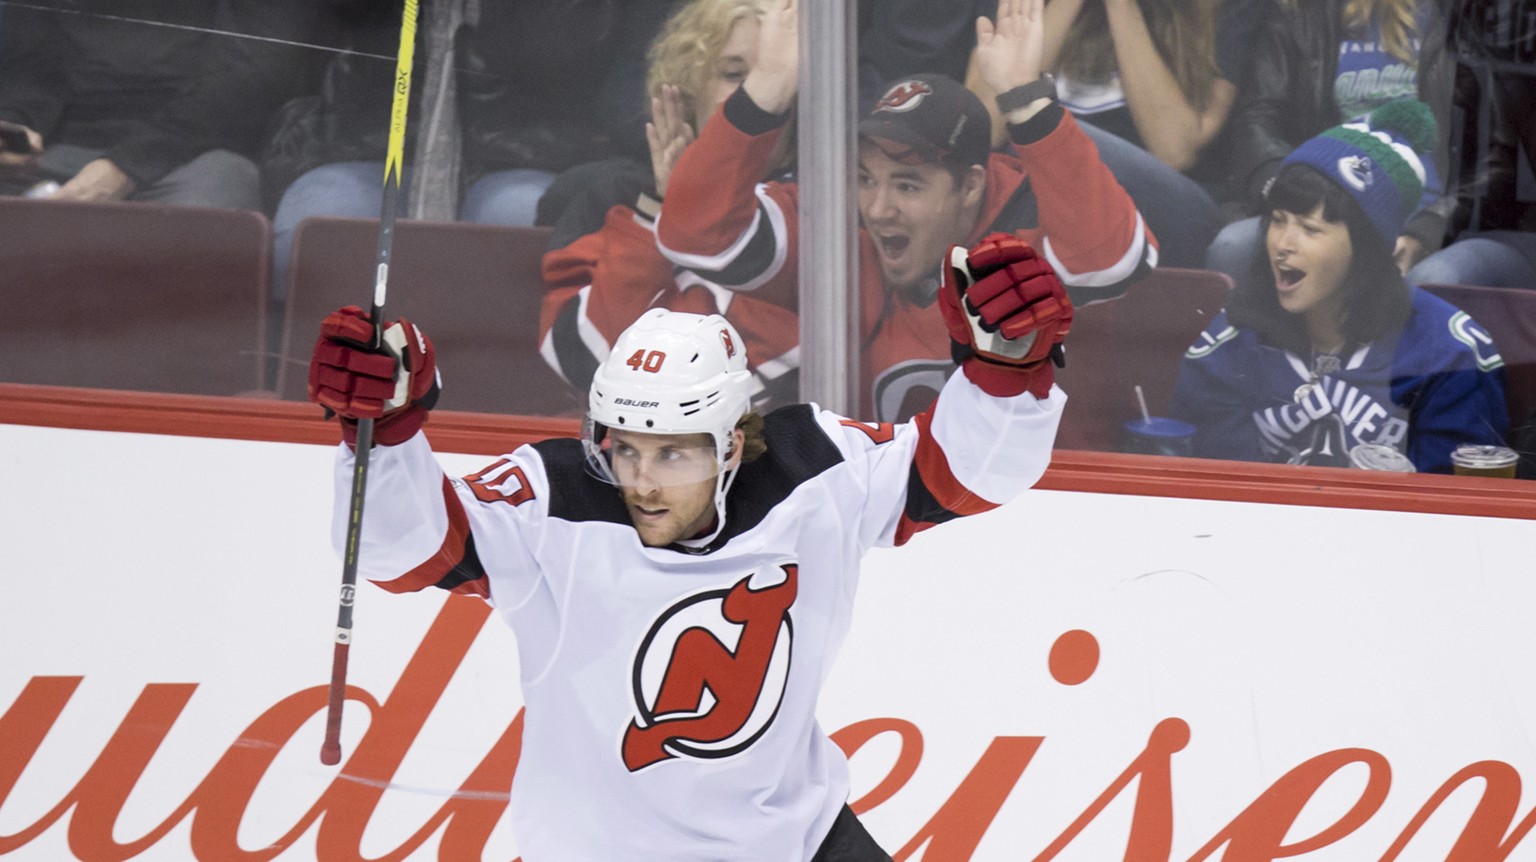 New Jersey Devils&#039; Blake Coleman celebrates a goal by Jimmy Hayes against the Vancouver Canucks during the second period of an NHL hockey game in Vancouver, British Columbia, Wednesday, Nov. 1, 2 ...